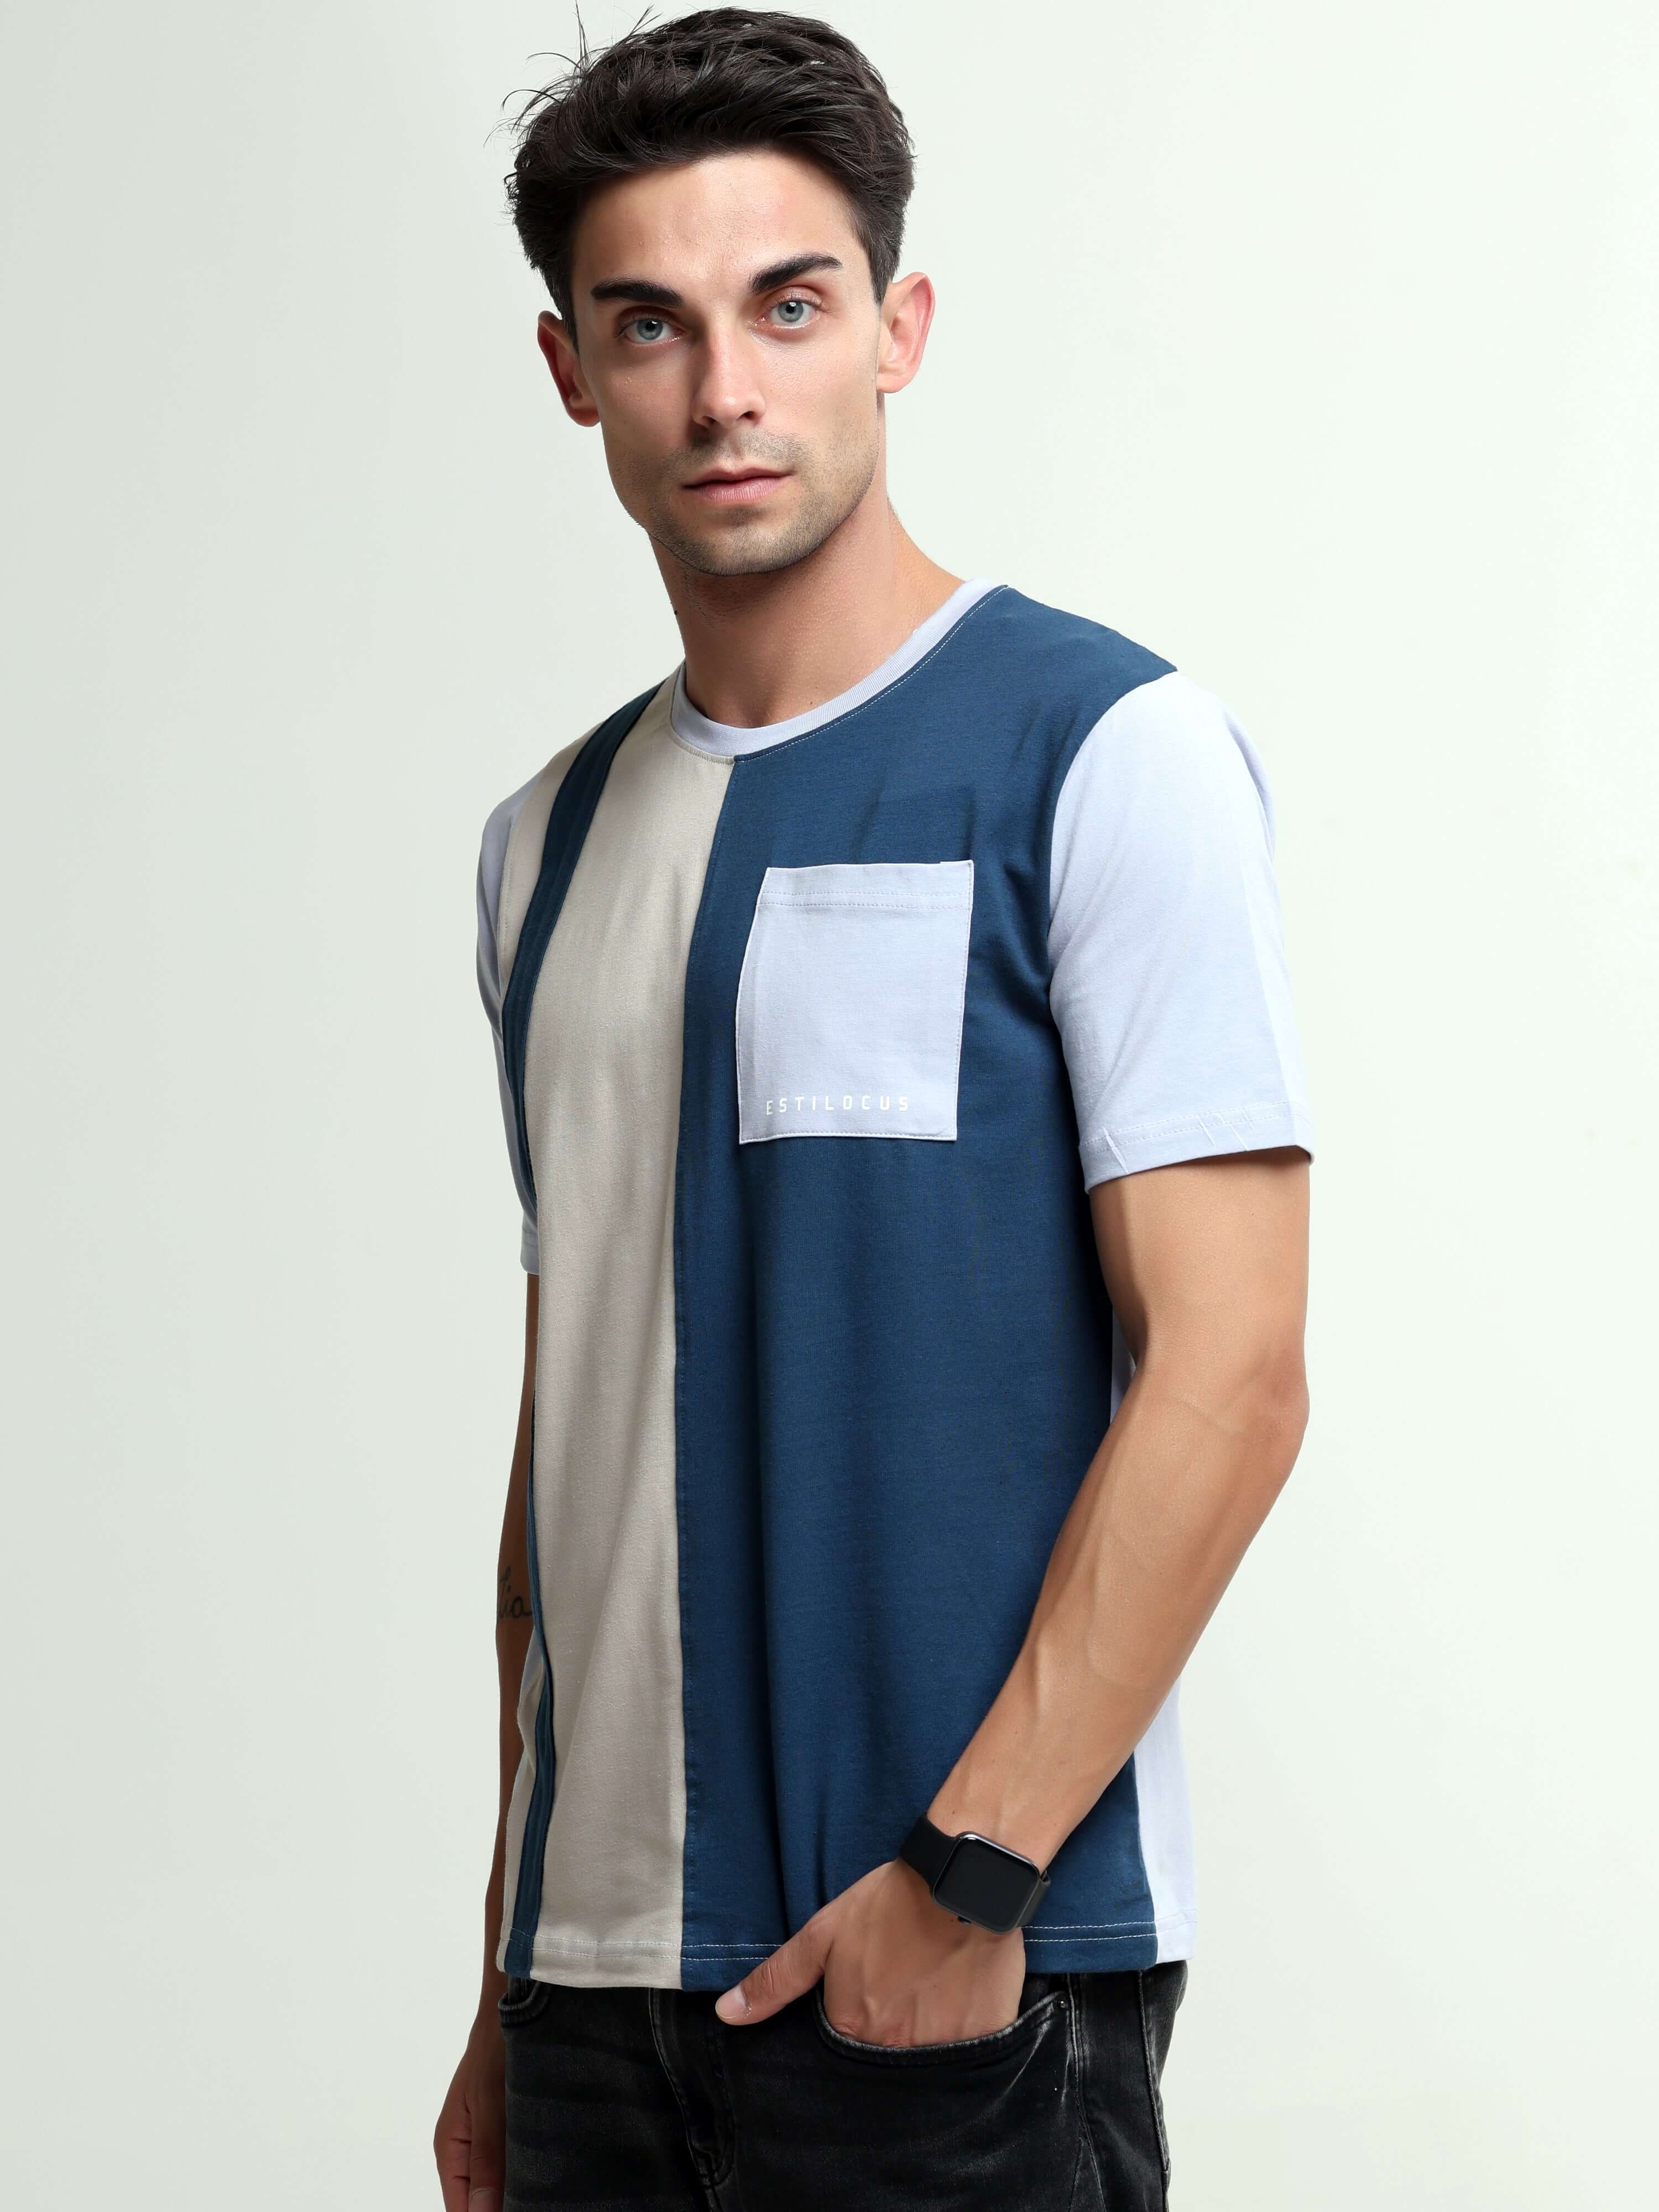 Surge clear blue light weight tshirt shop online at Estilocus. This relax-fit Cut and Sew T-shirt is comfortable and the perfect essential all year round. Pair it with white jeans and sneakers and layer it up with a denim jacket for a casual and put-toget